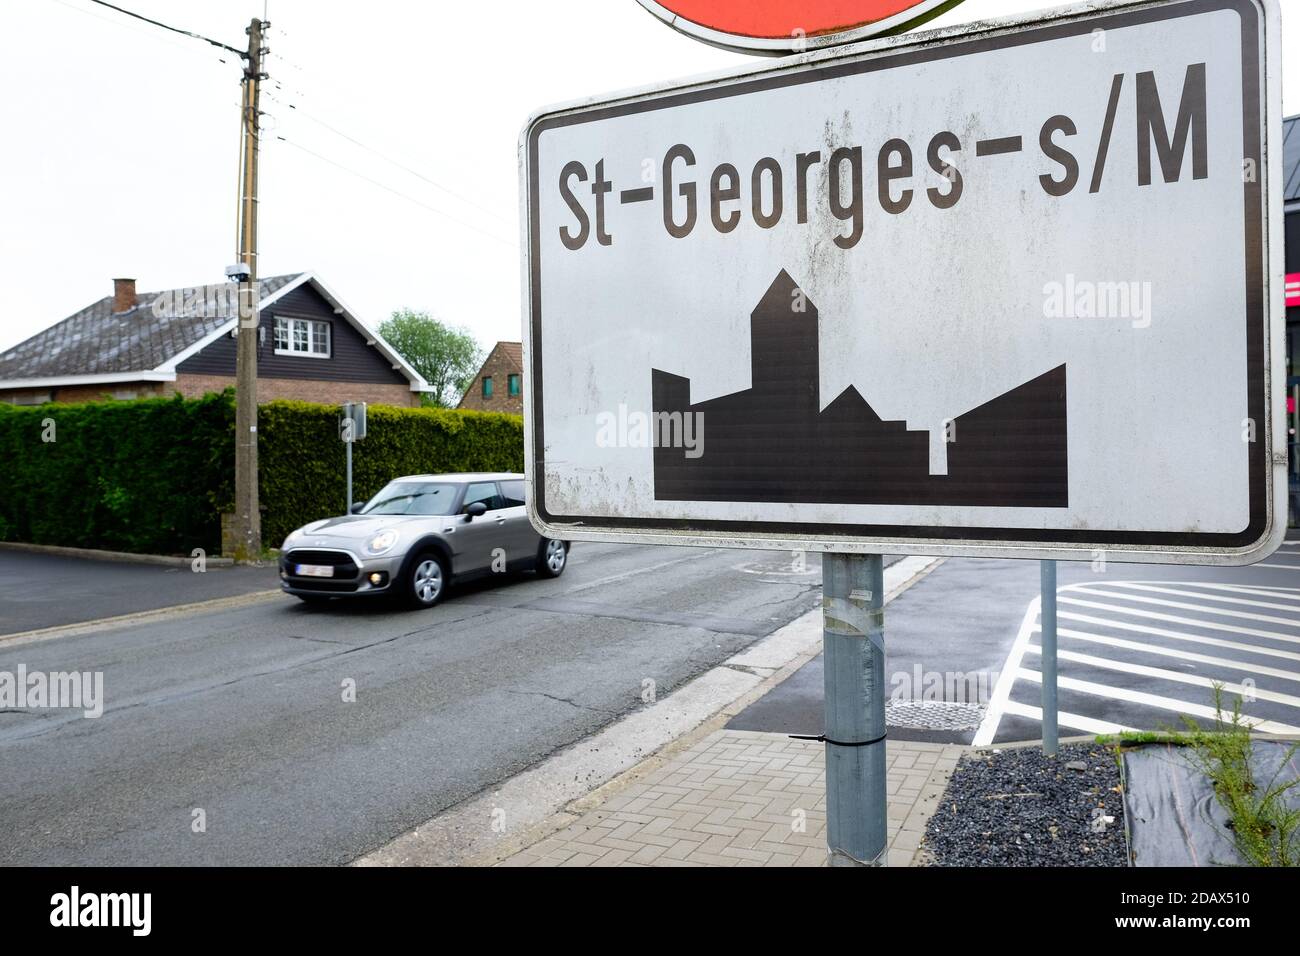 Illustration shows the name of the Saint-Georges-sur-Meuse municipality on a road sign, Wednesday 16 May 2018. BELGA PHOTO BRUNO FAHY Stock Photo